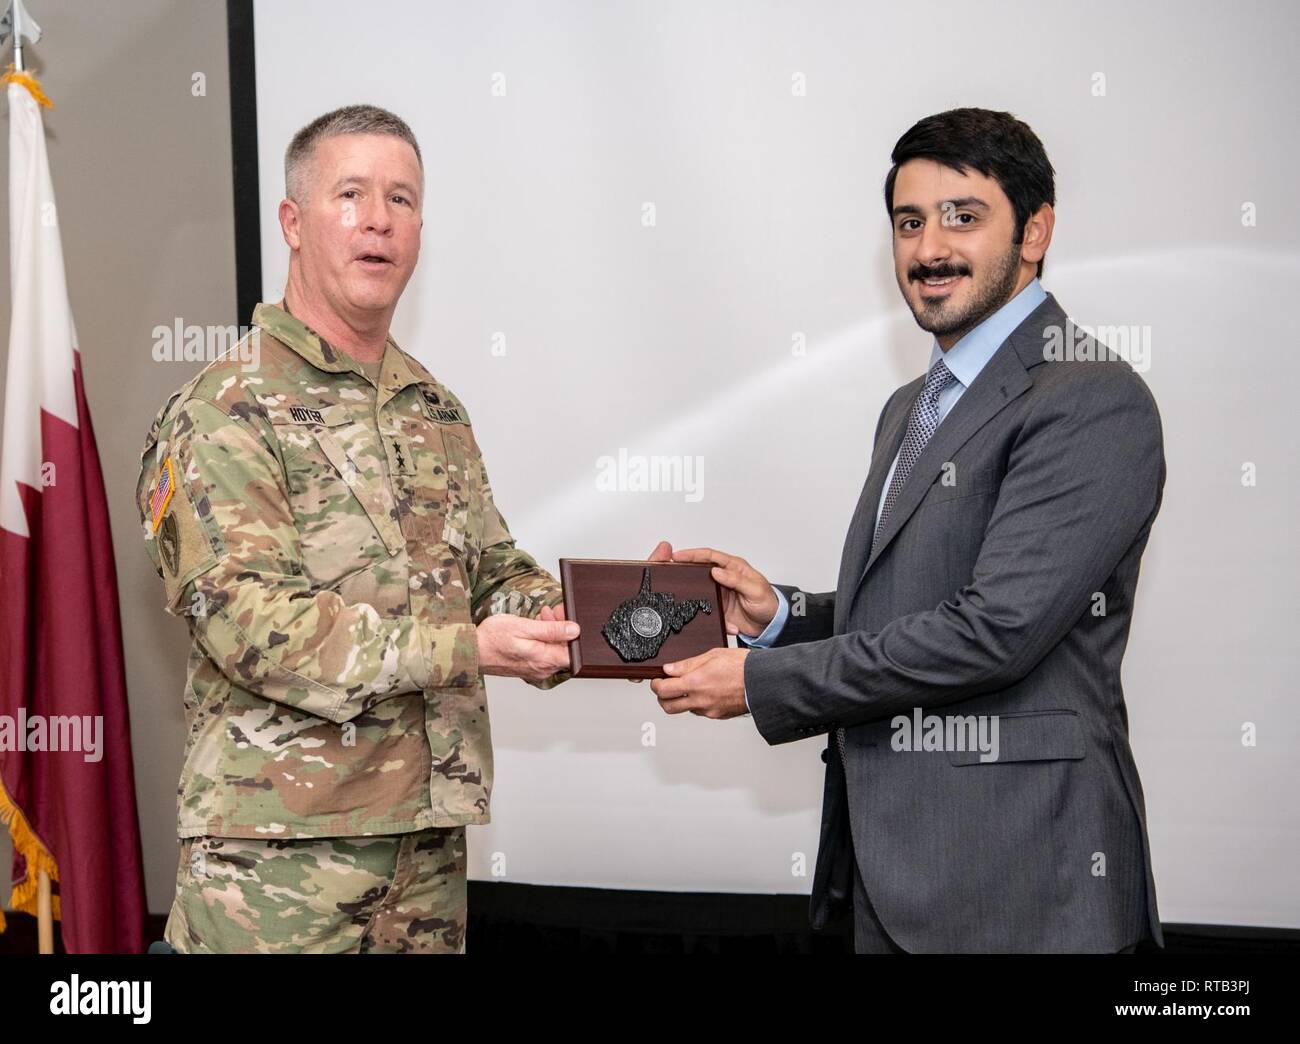 Maj. Gen. James Hoyer, Adjutant General of the West Virginia National Guard, presents Qatar Ministry of Interior representative Mohammed Al-Sowaidi with a gift during the Leader Development & Education for Sustained Peace (LDESP) Seminar on Qatar Feb. 6, 2019, in Charleston, W.Va. LDESP is a Department of Defense ) organization at the Naval Postgraduate School (NPS) in Monterey, California, that prepares senior military and civilian U.S. leaders for short and long-term engagement in Africa, the Pacific, the Middle East, Europe and other regions around the world. Stock Photo